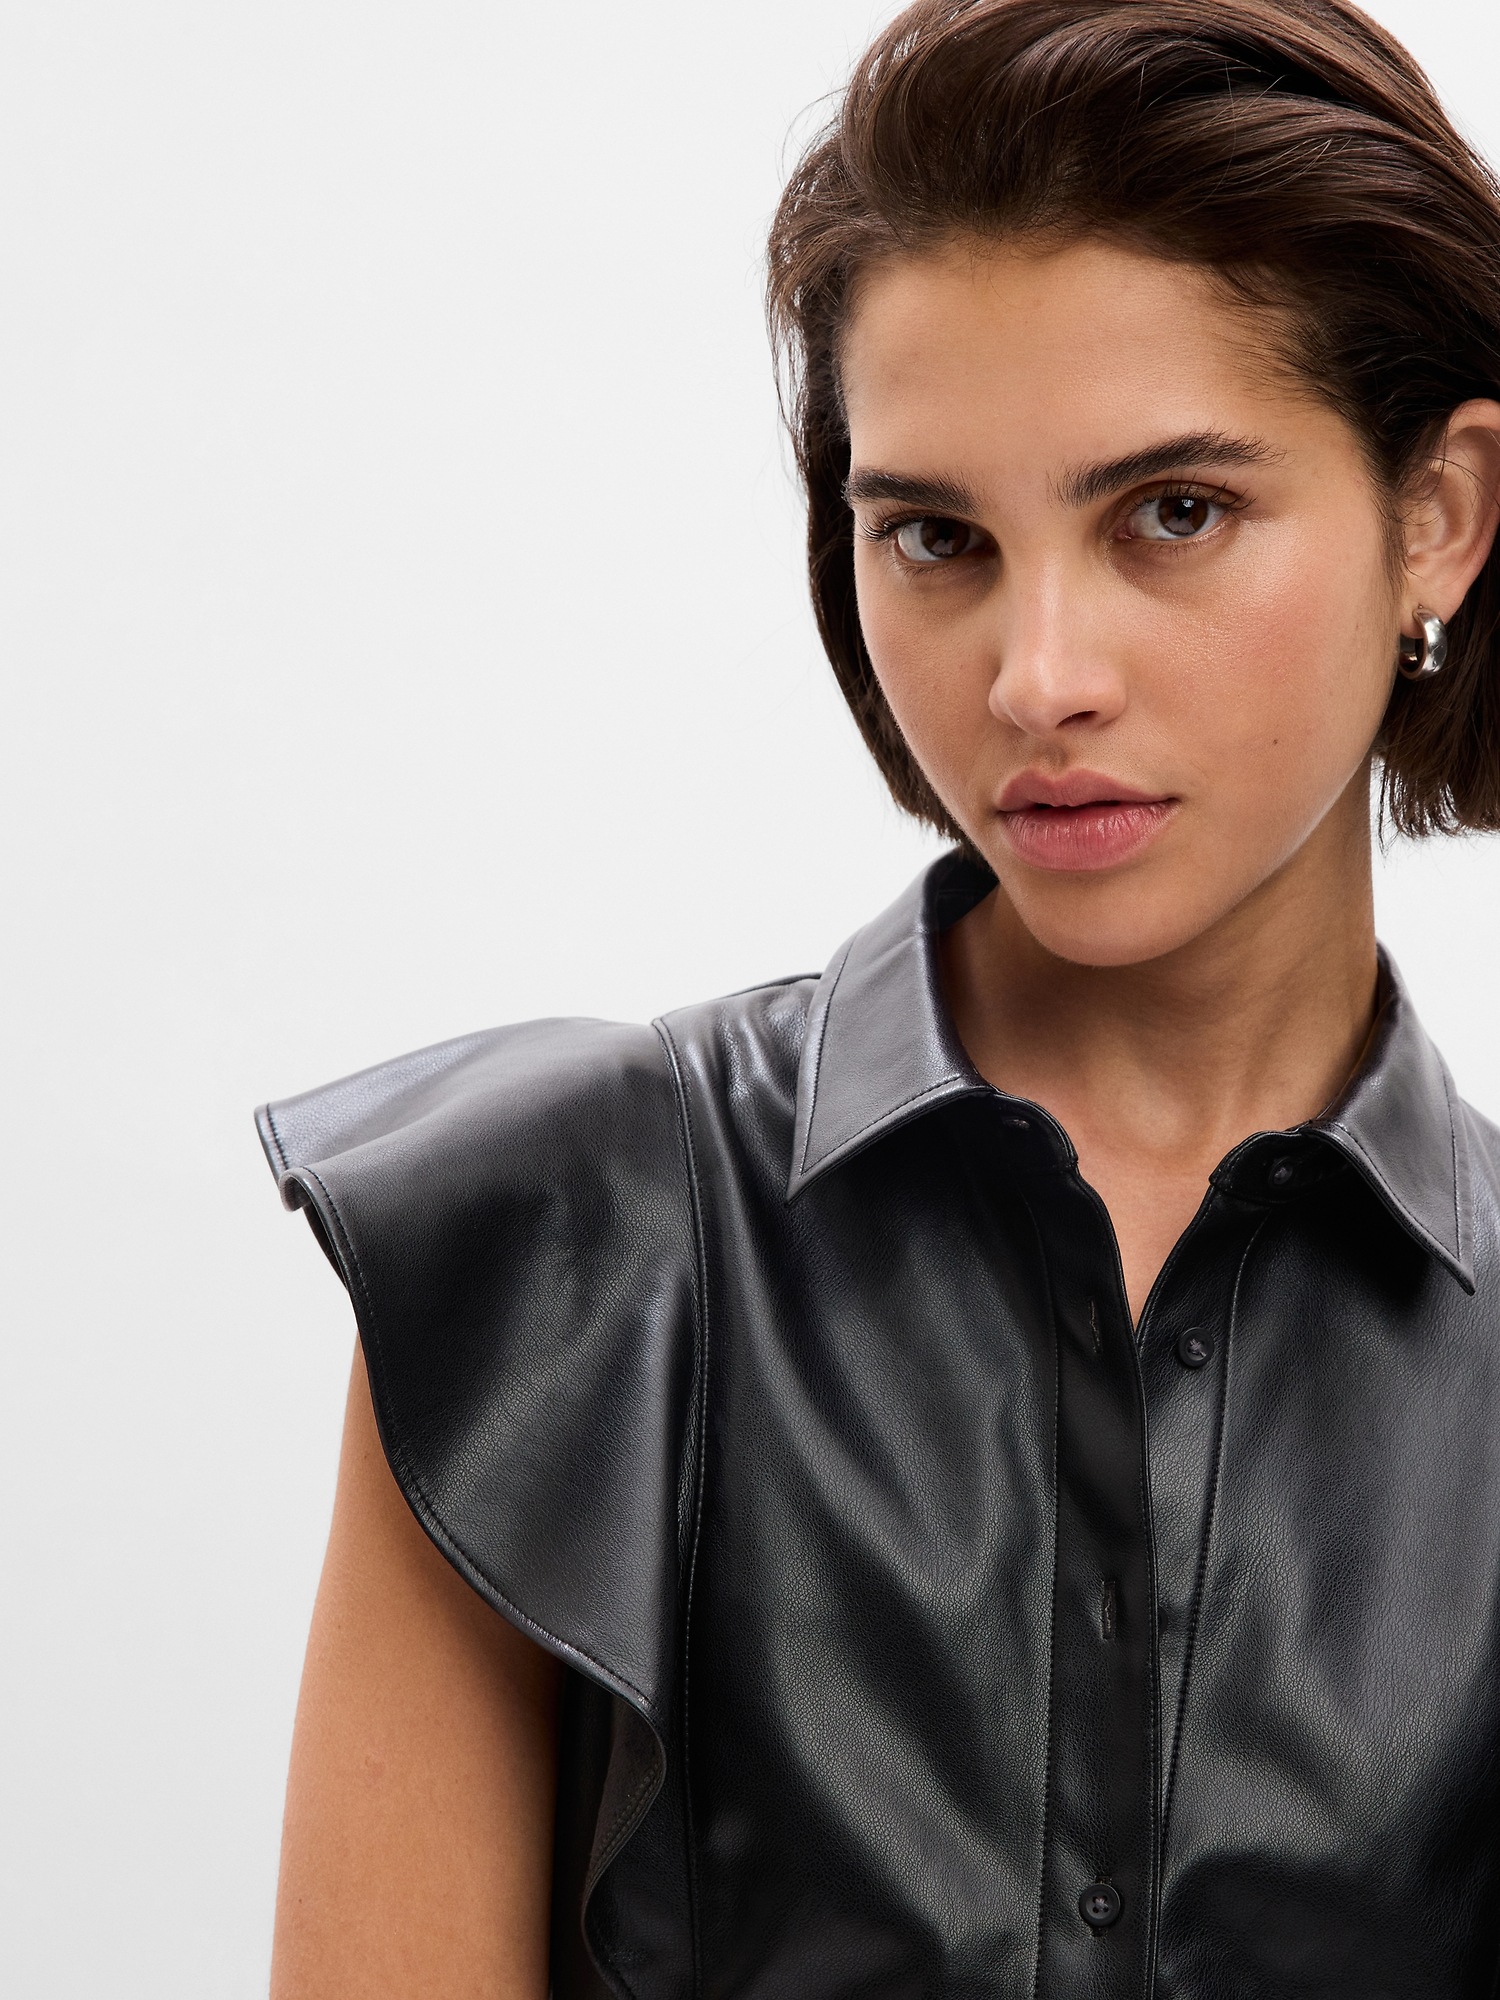 Faux Leather Tops, Vegan Leather Tops